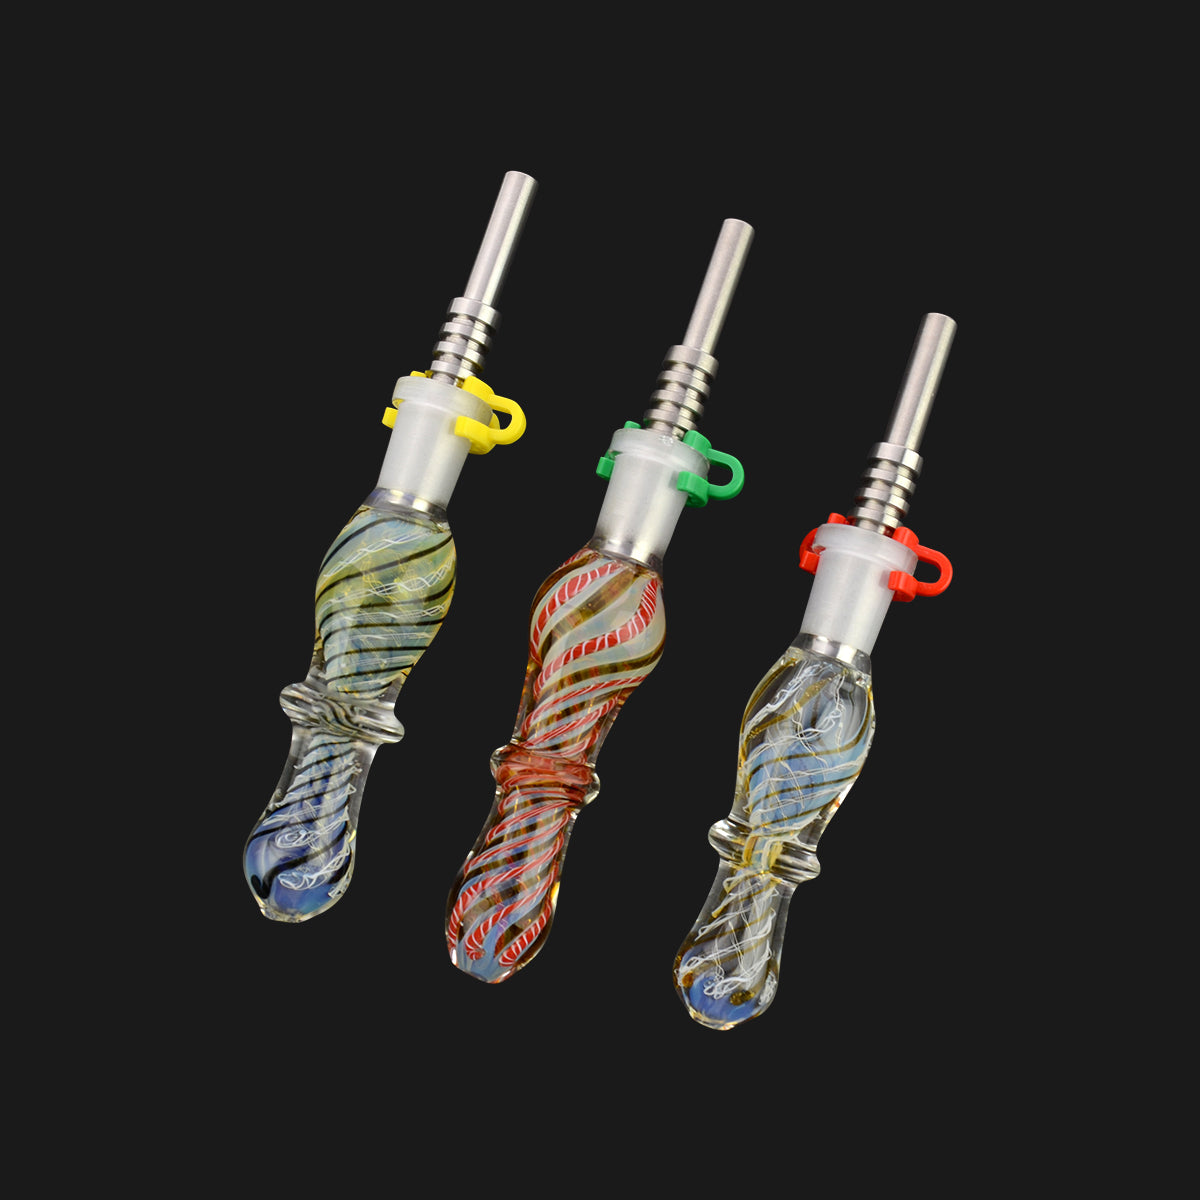 6" Twisting Art Nectar Collector Concentrate Straw with 14mm Plastic Clip and Titanium Nail